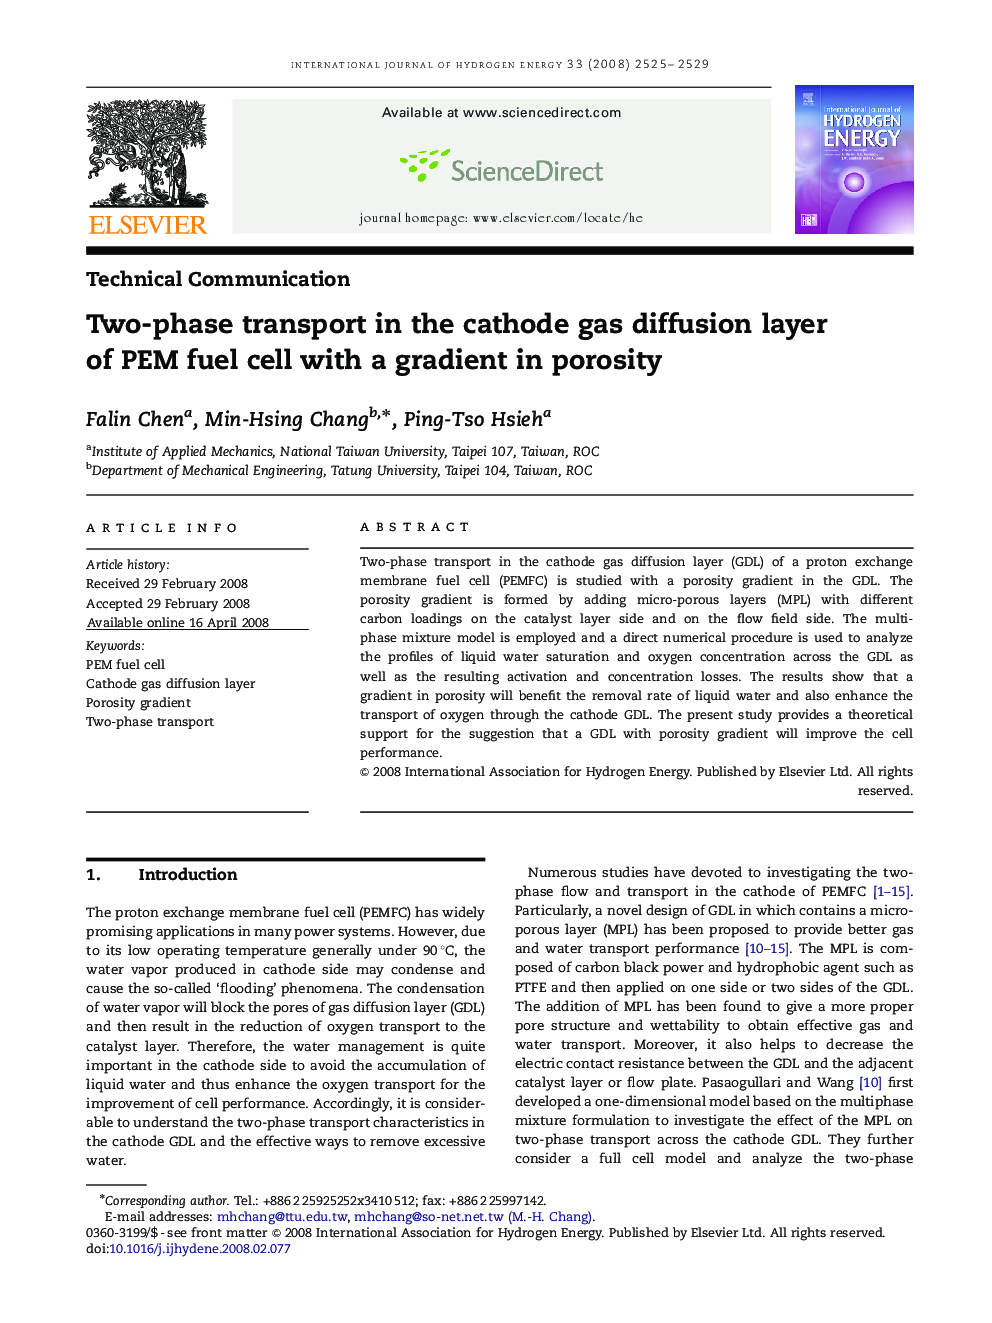 Two-phase transport in the cathode gas diffusion layer of PEM fuel cell with a gradient in porosity